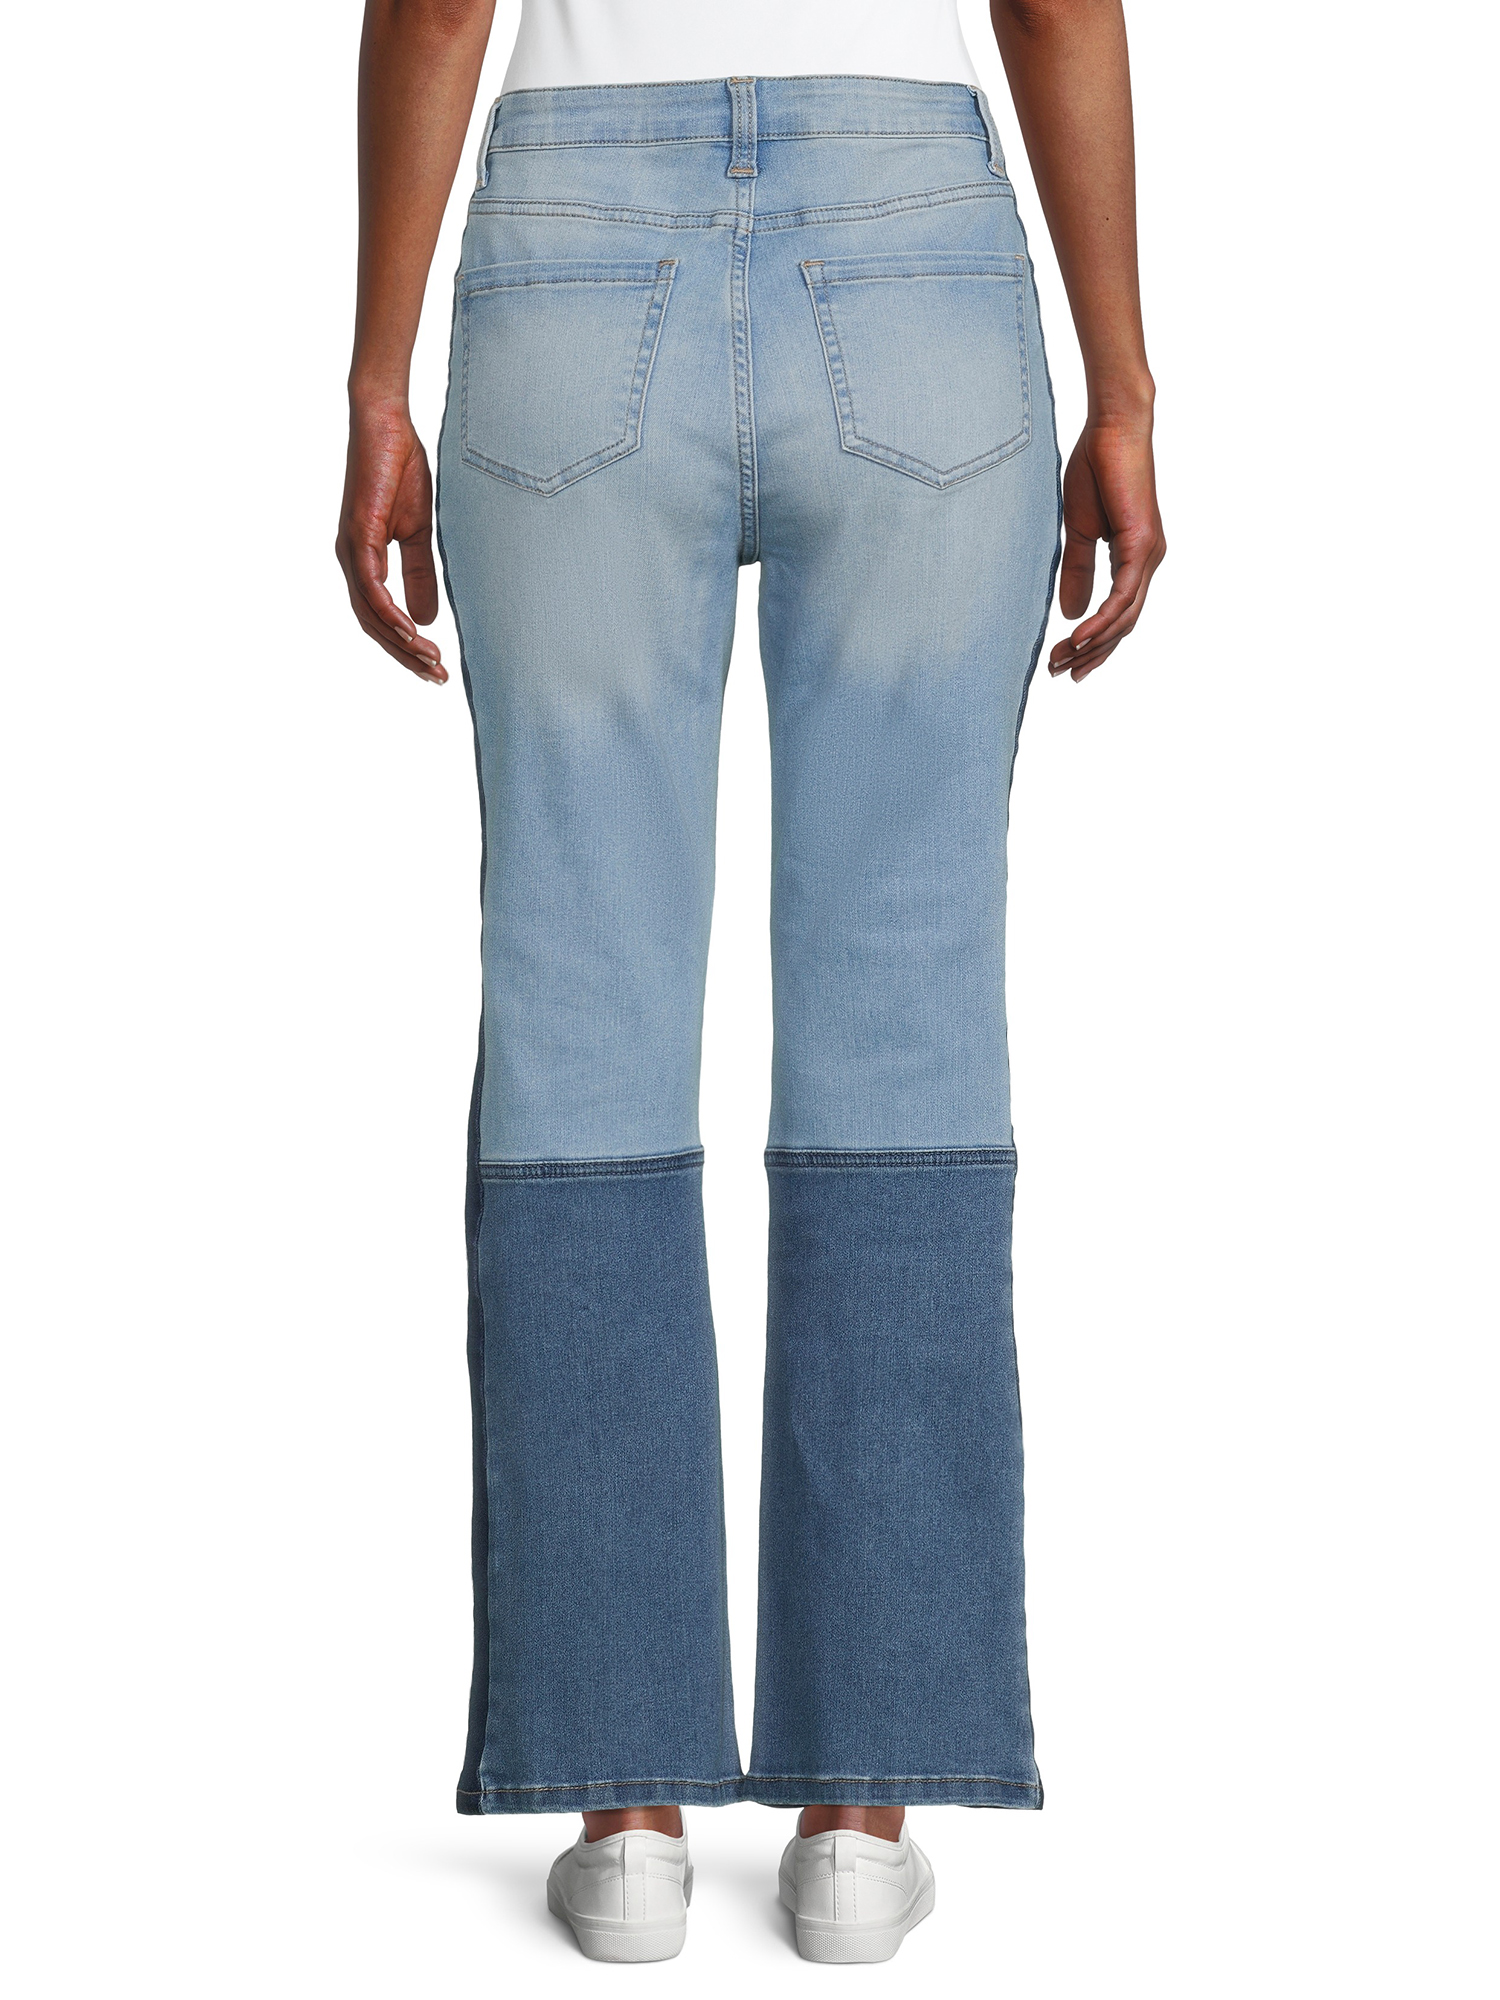 Time and Tru Women's Colorblocked Bootcut Jeans - image 5 of 6